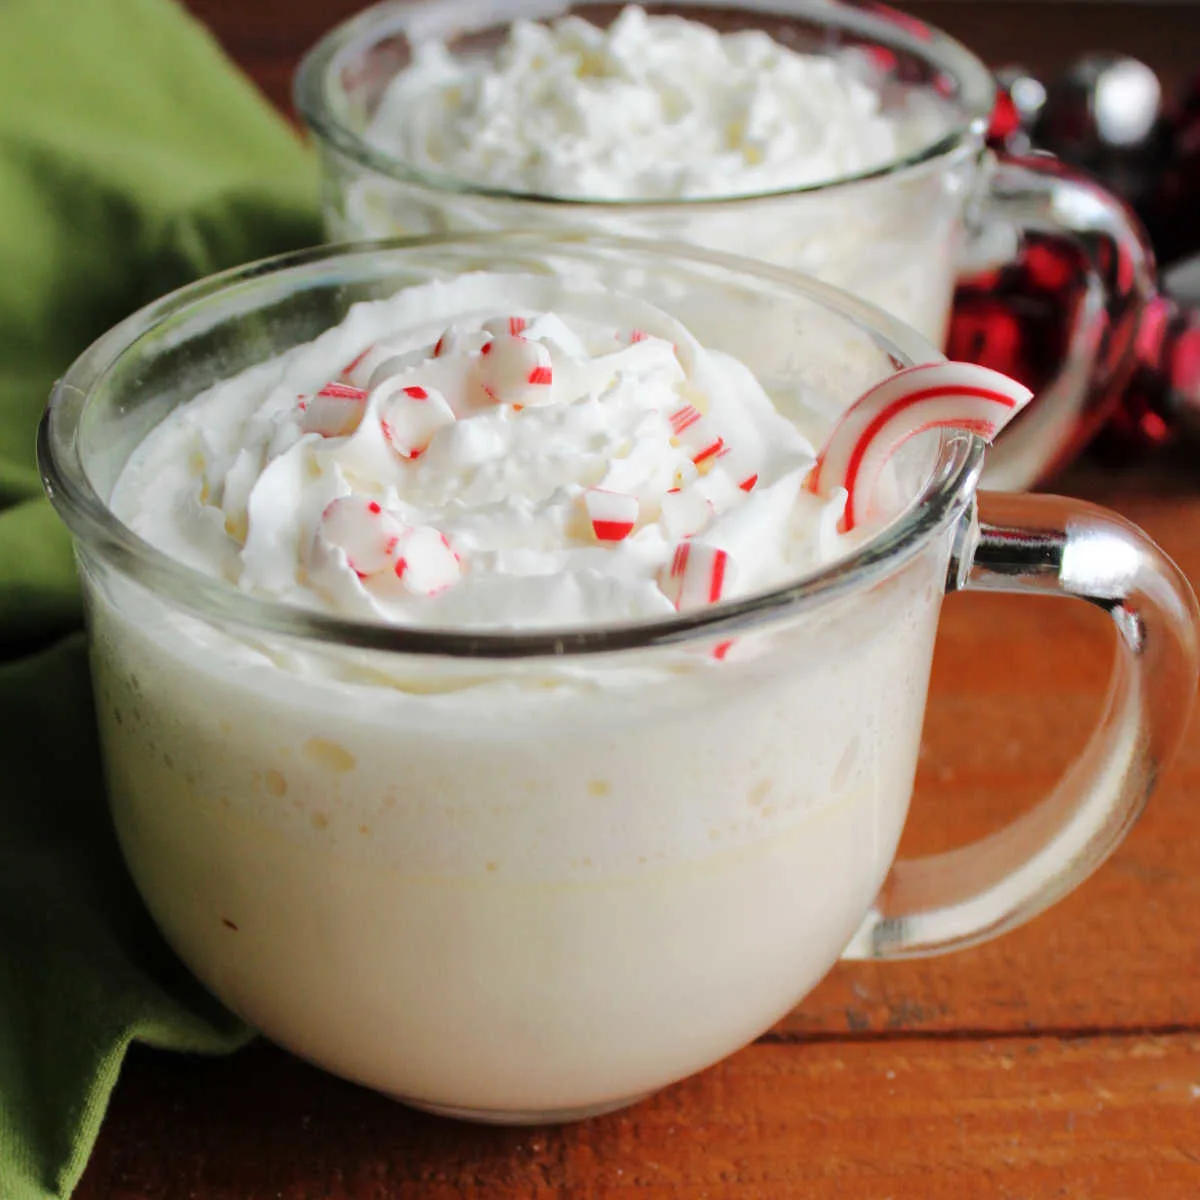 Two large glass mugs filled with creamy peppermint white hot chocolate topped with whipped cream and candy cane pieces.